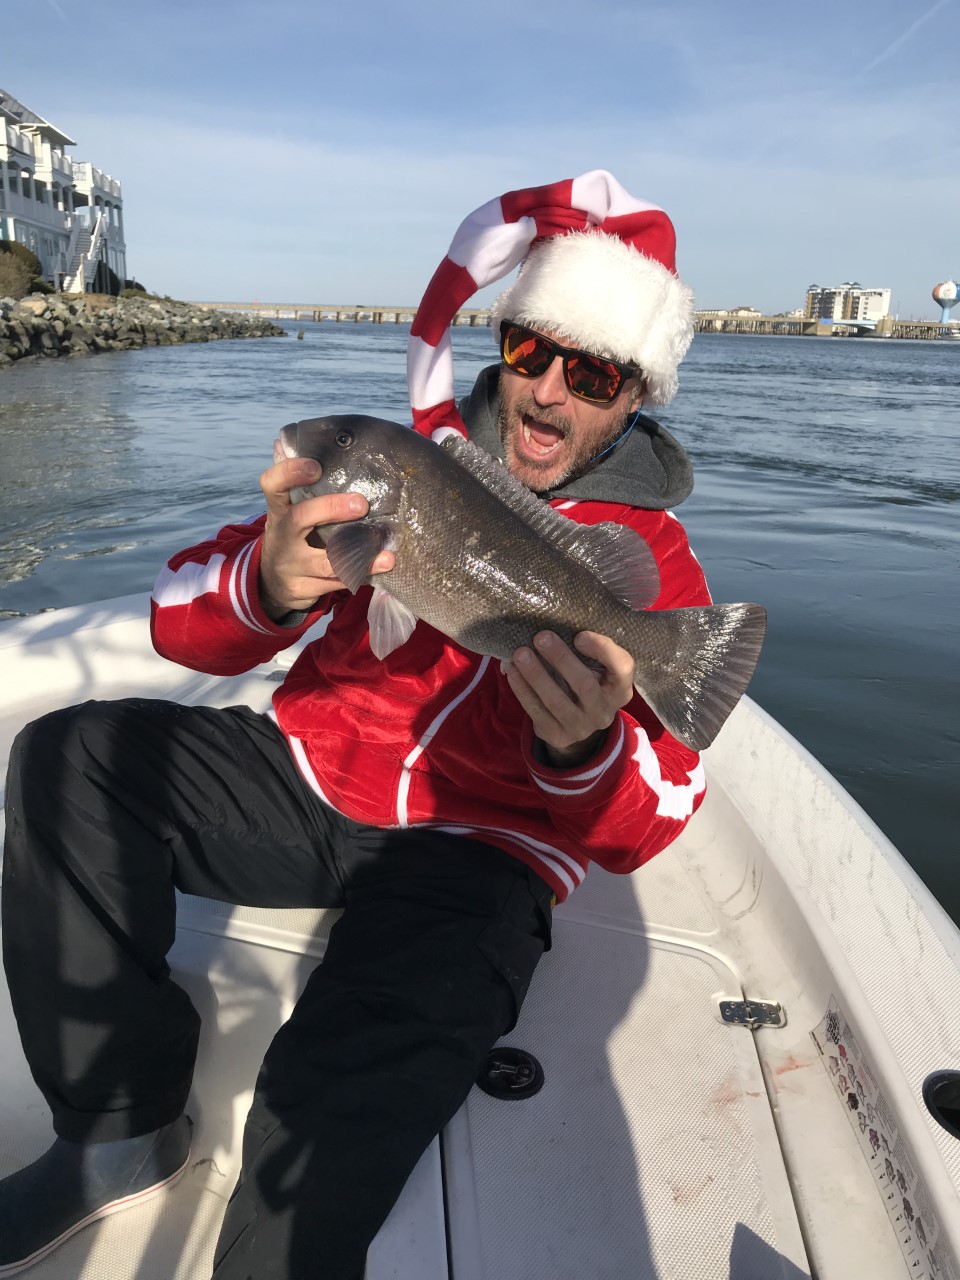 tog fishing in santa outfit